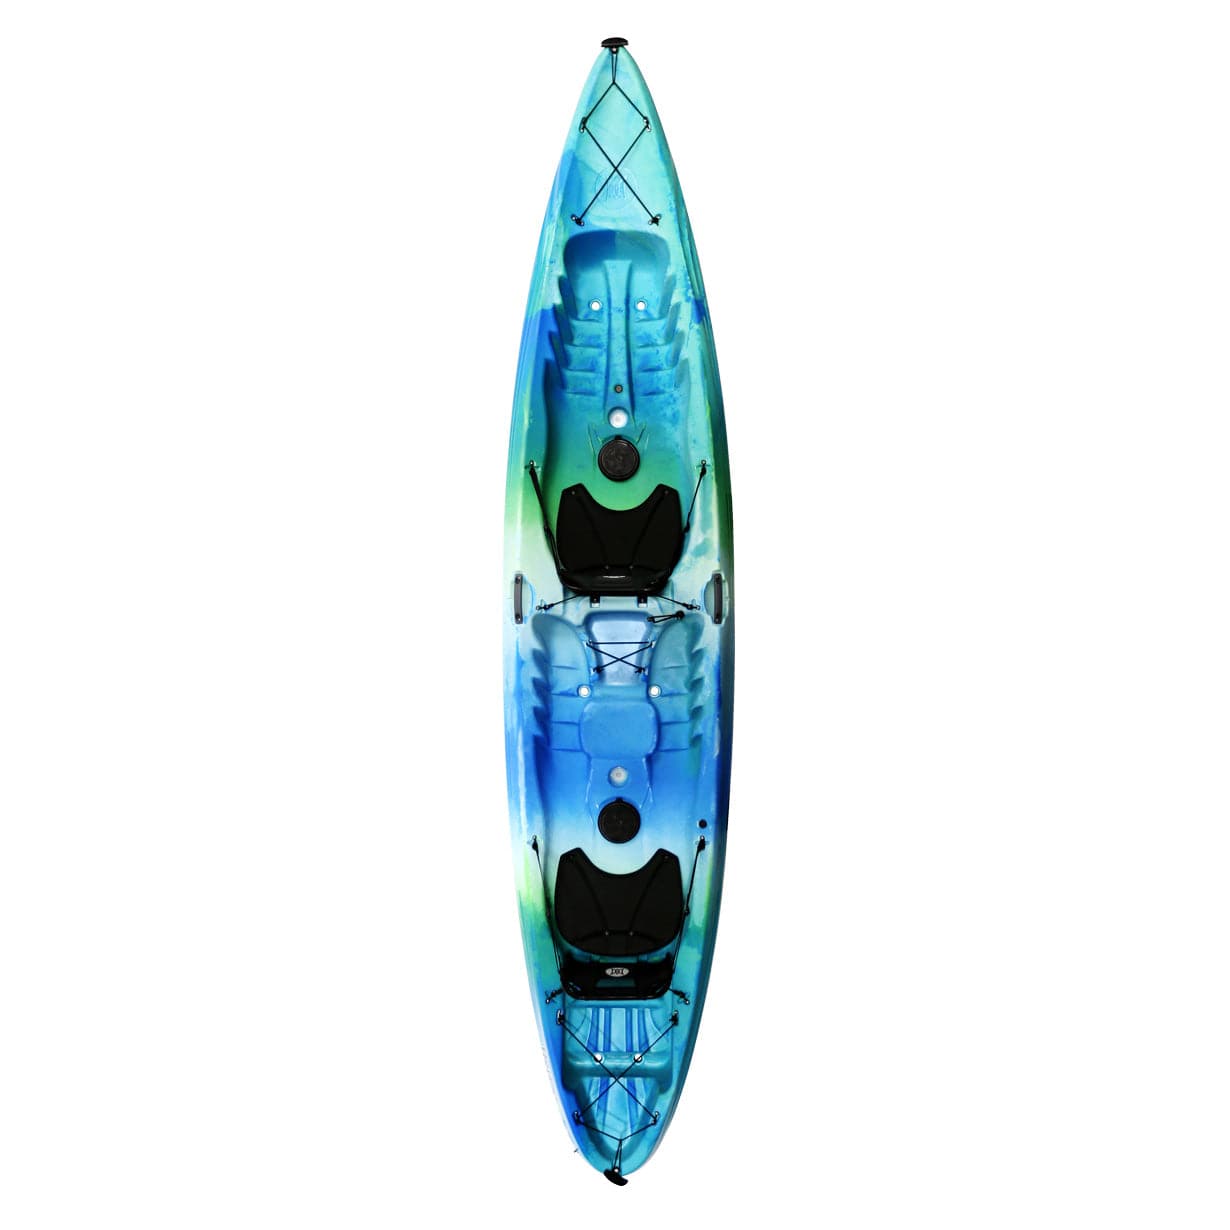 Featuring the Tribe 13.5 Tandem tandem / 2 person rec kayak manufactured by Perception shown here from a third angle.